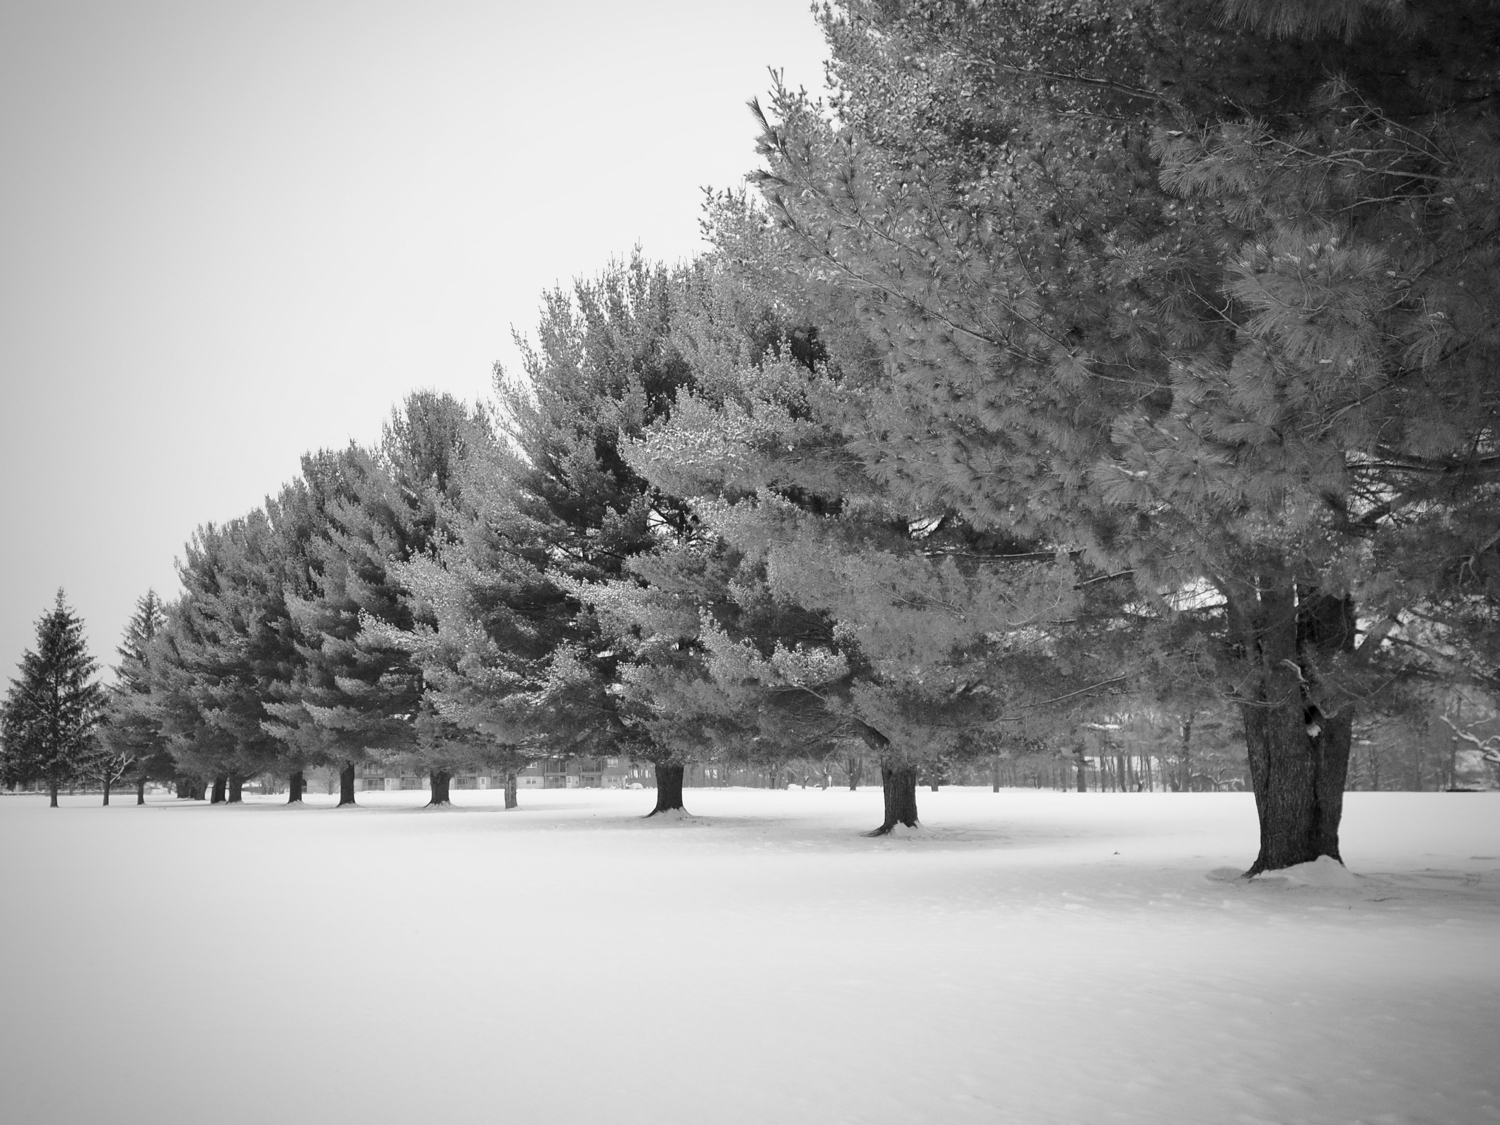 Line of trees in snow — copyright Trace Meek